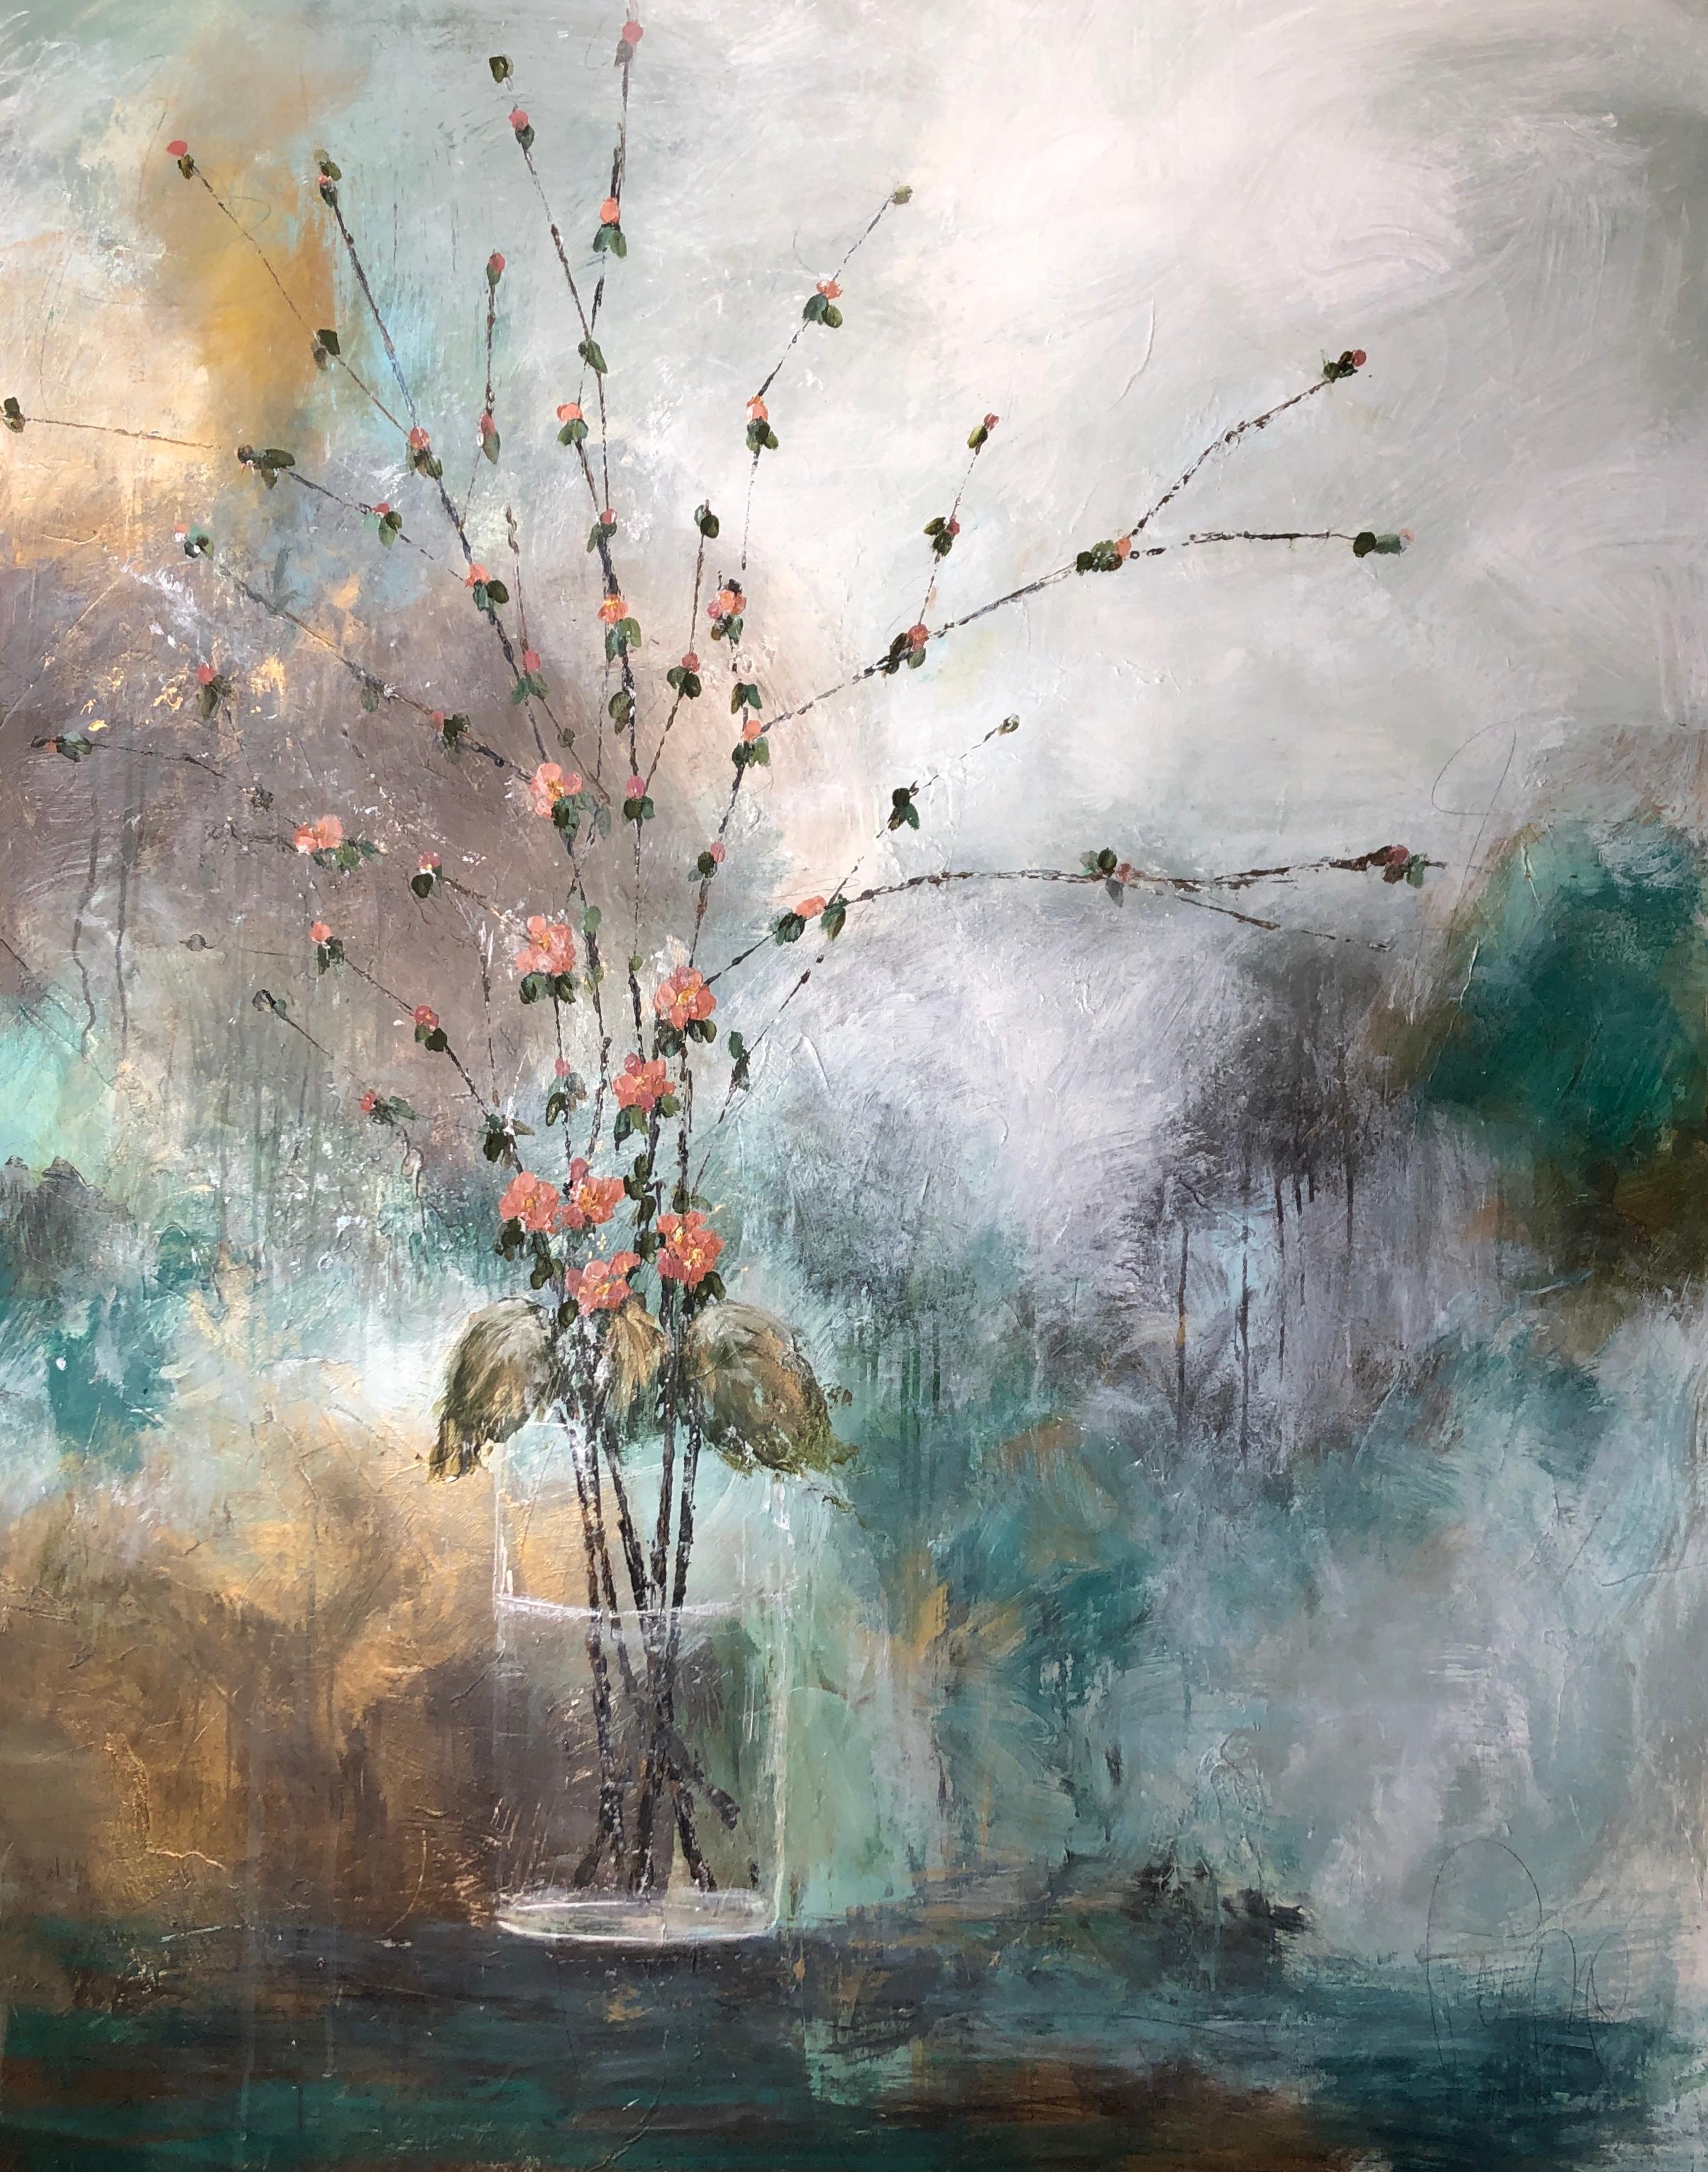 'Pink Quince' is a medium size mixed media on canvas abstract floral painting of vertical format, created by American artist Melissa Payne Baker in 2019. Featuring a soft palette mostly made of blue, green, pink, and grey playing beautifully with